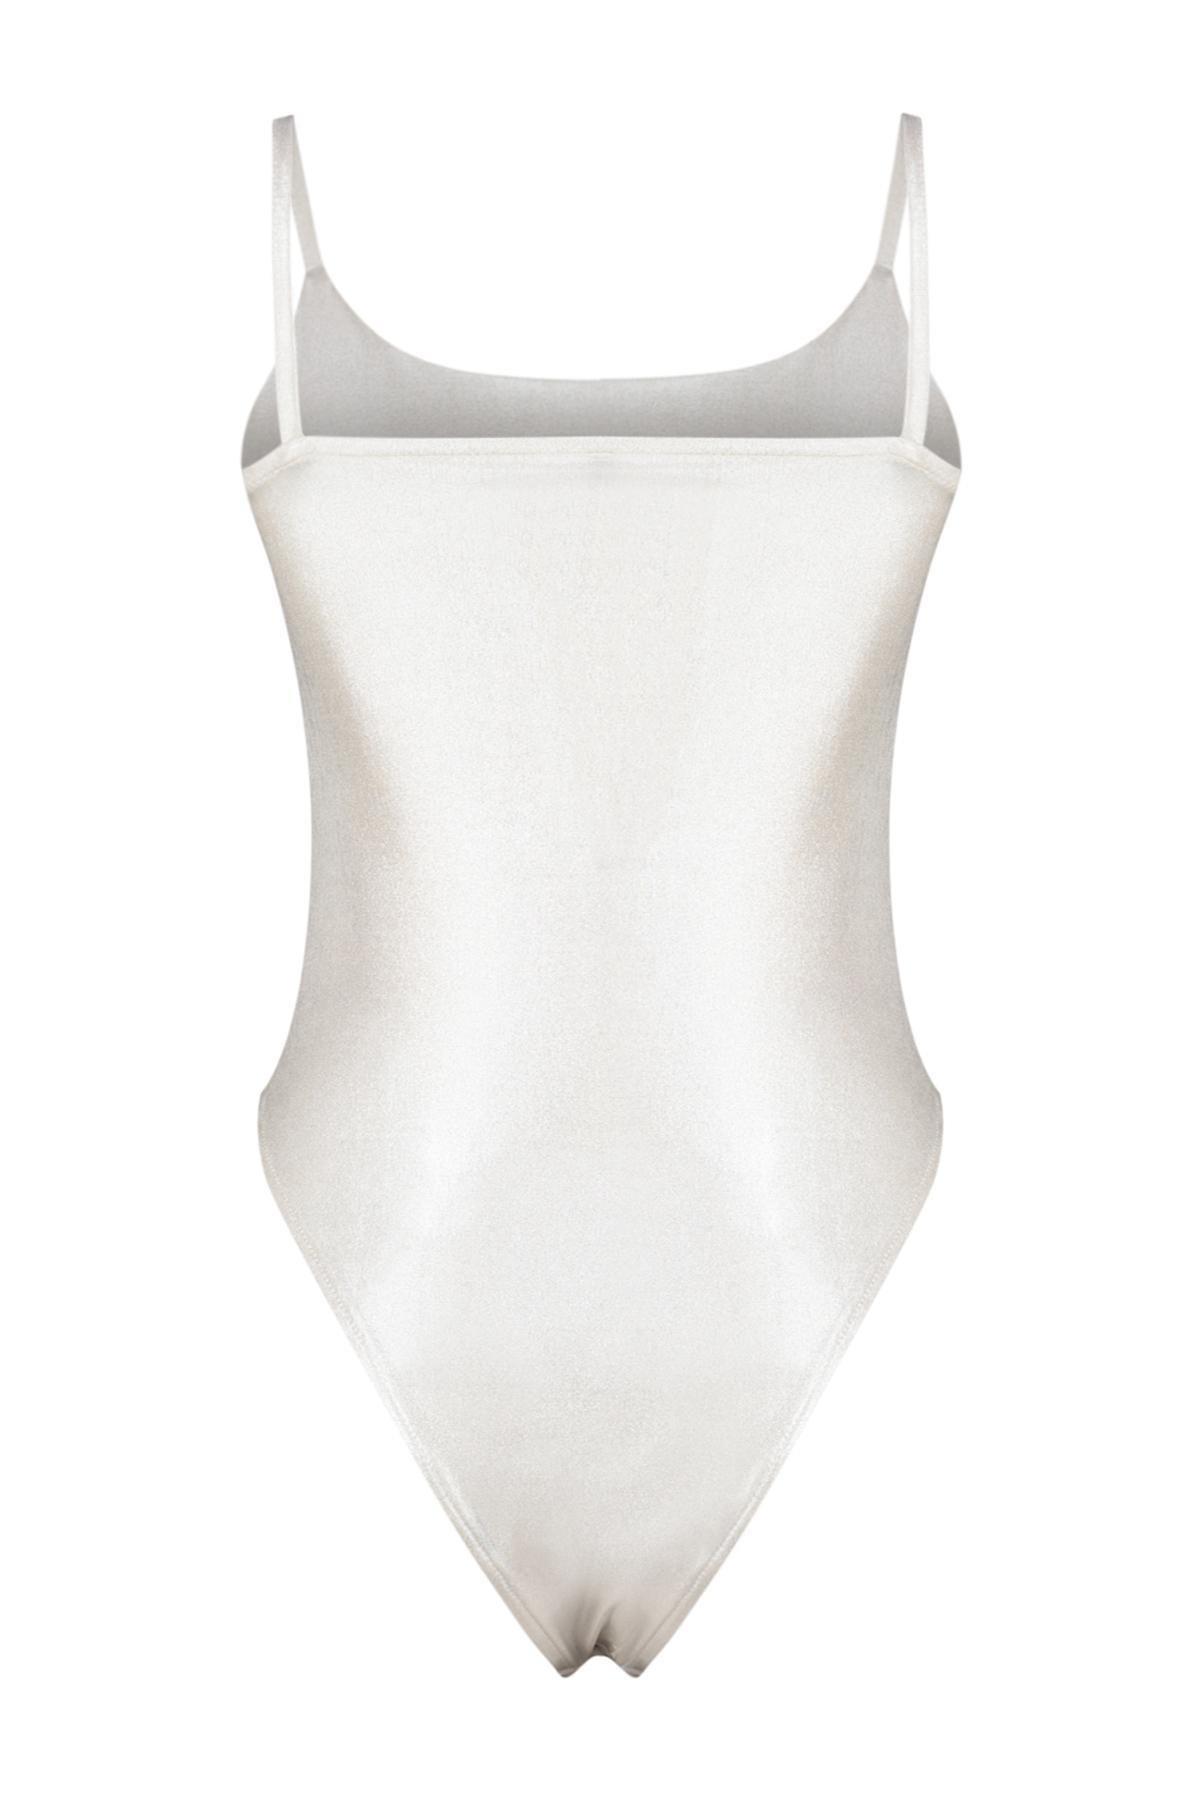 Trendyol - Grey Bodysuit with Straps and Snap Fasteners